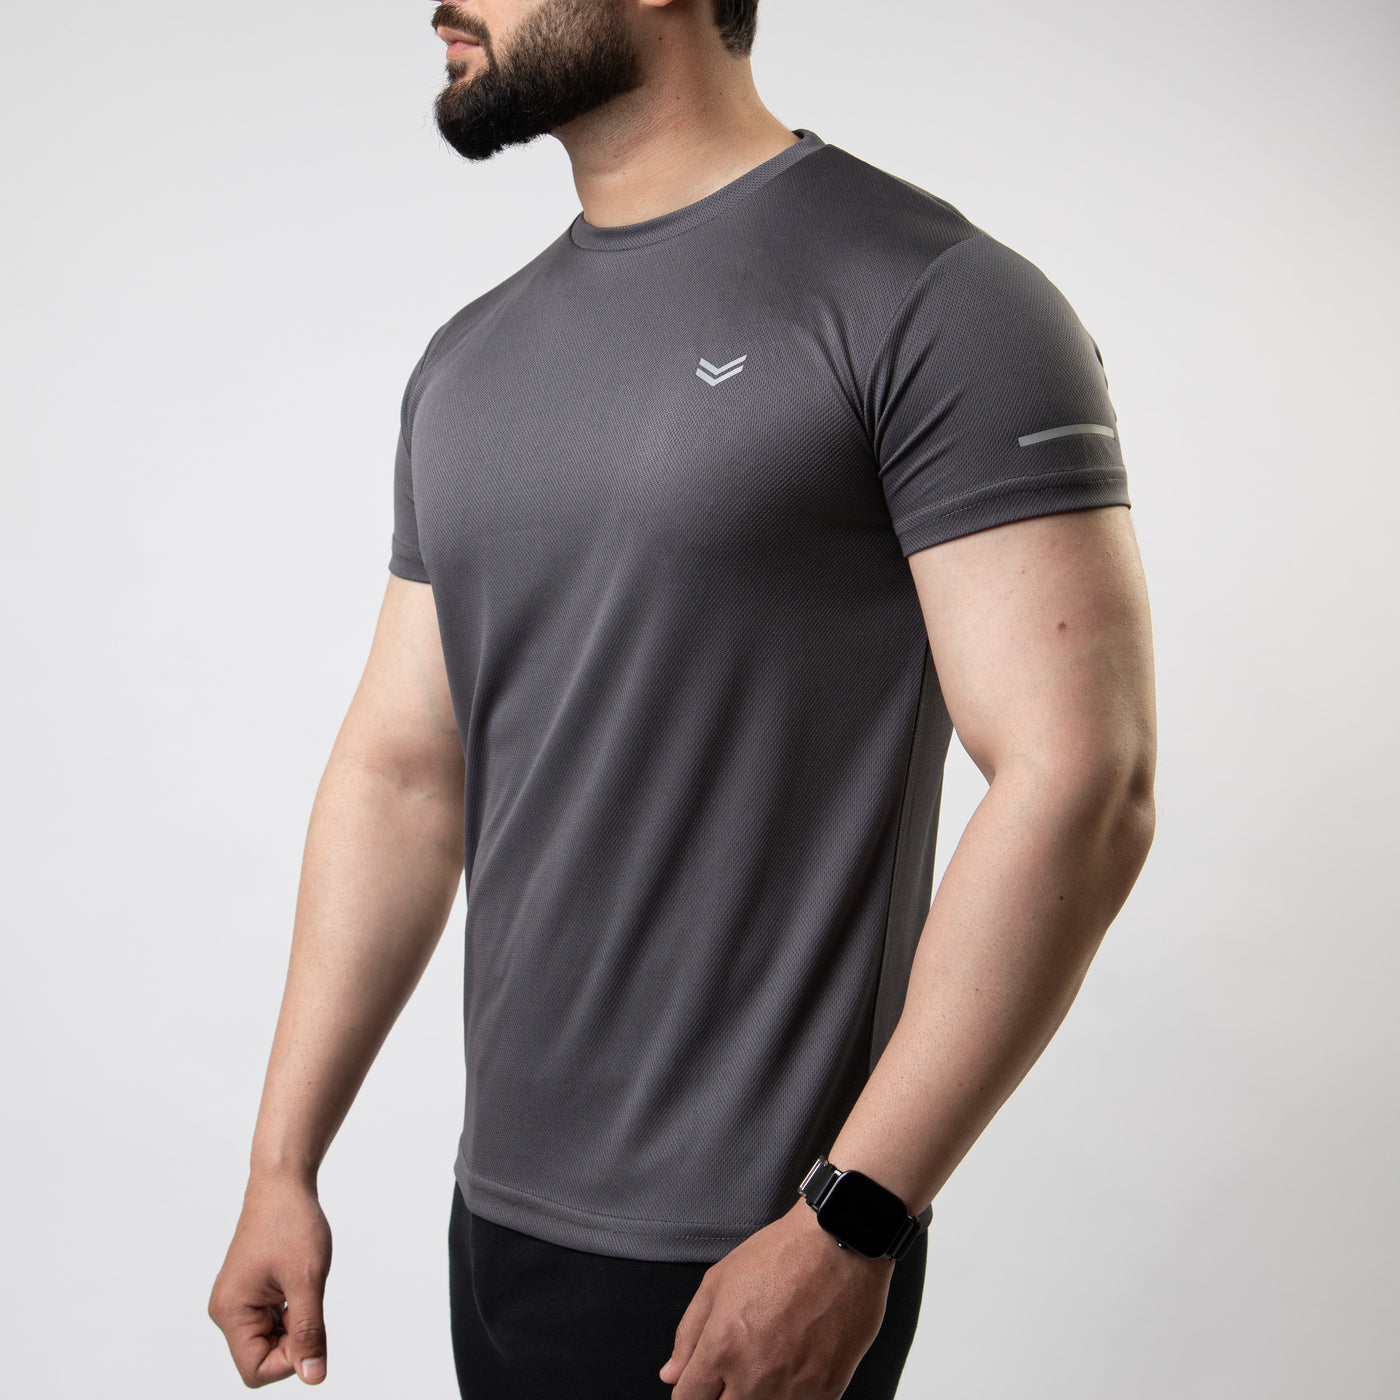 Gray Mesh Quick Dry T-Shirt With Reflective Detailing